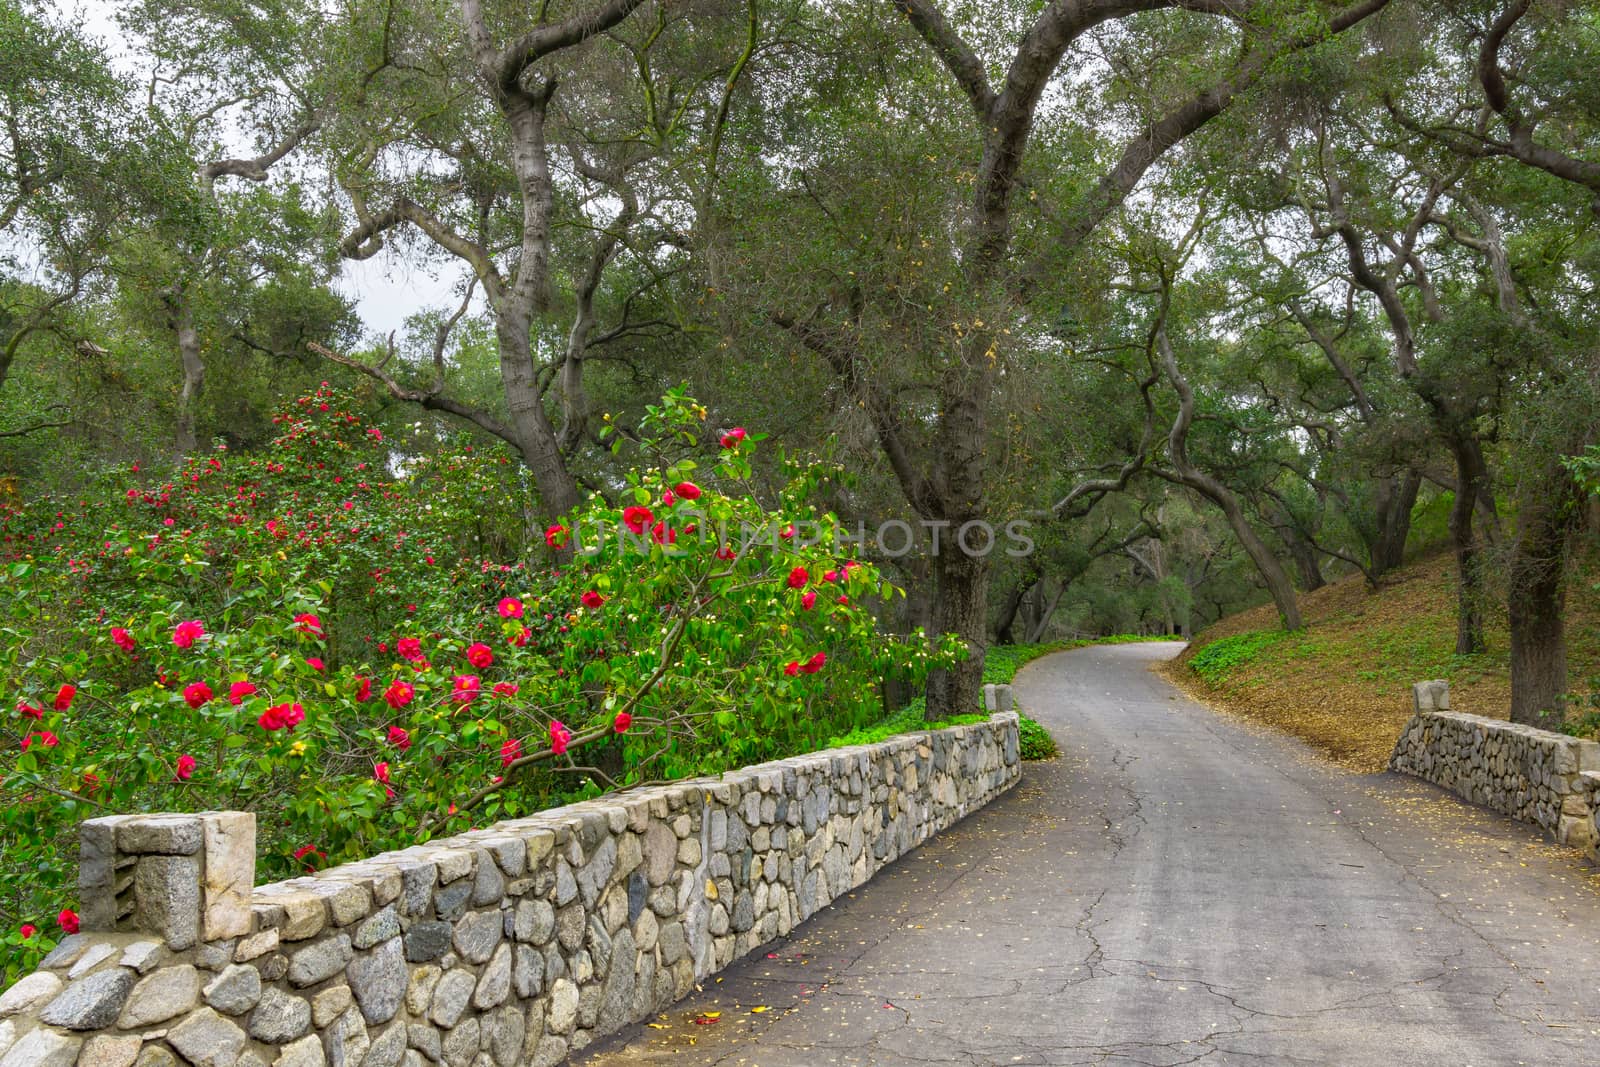 Camellia lined stone bridge and path through the Live Oak forest.